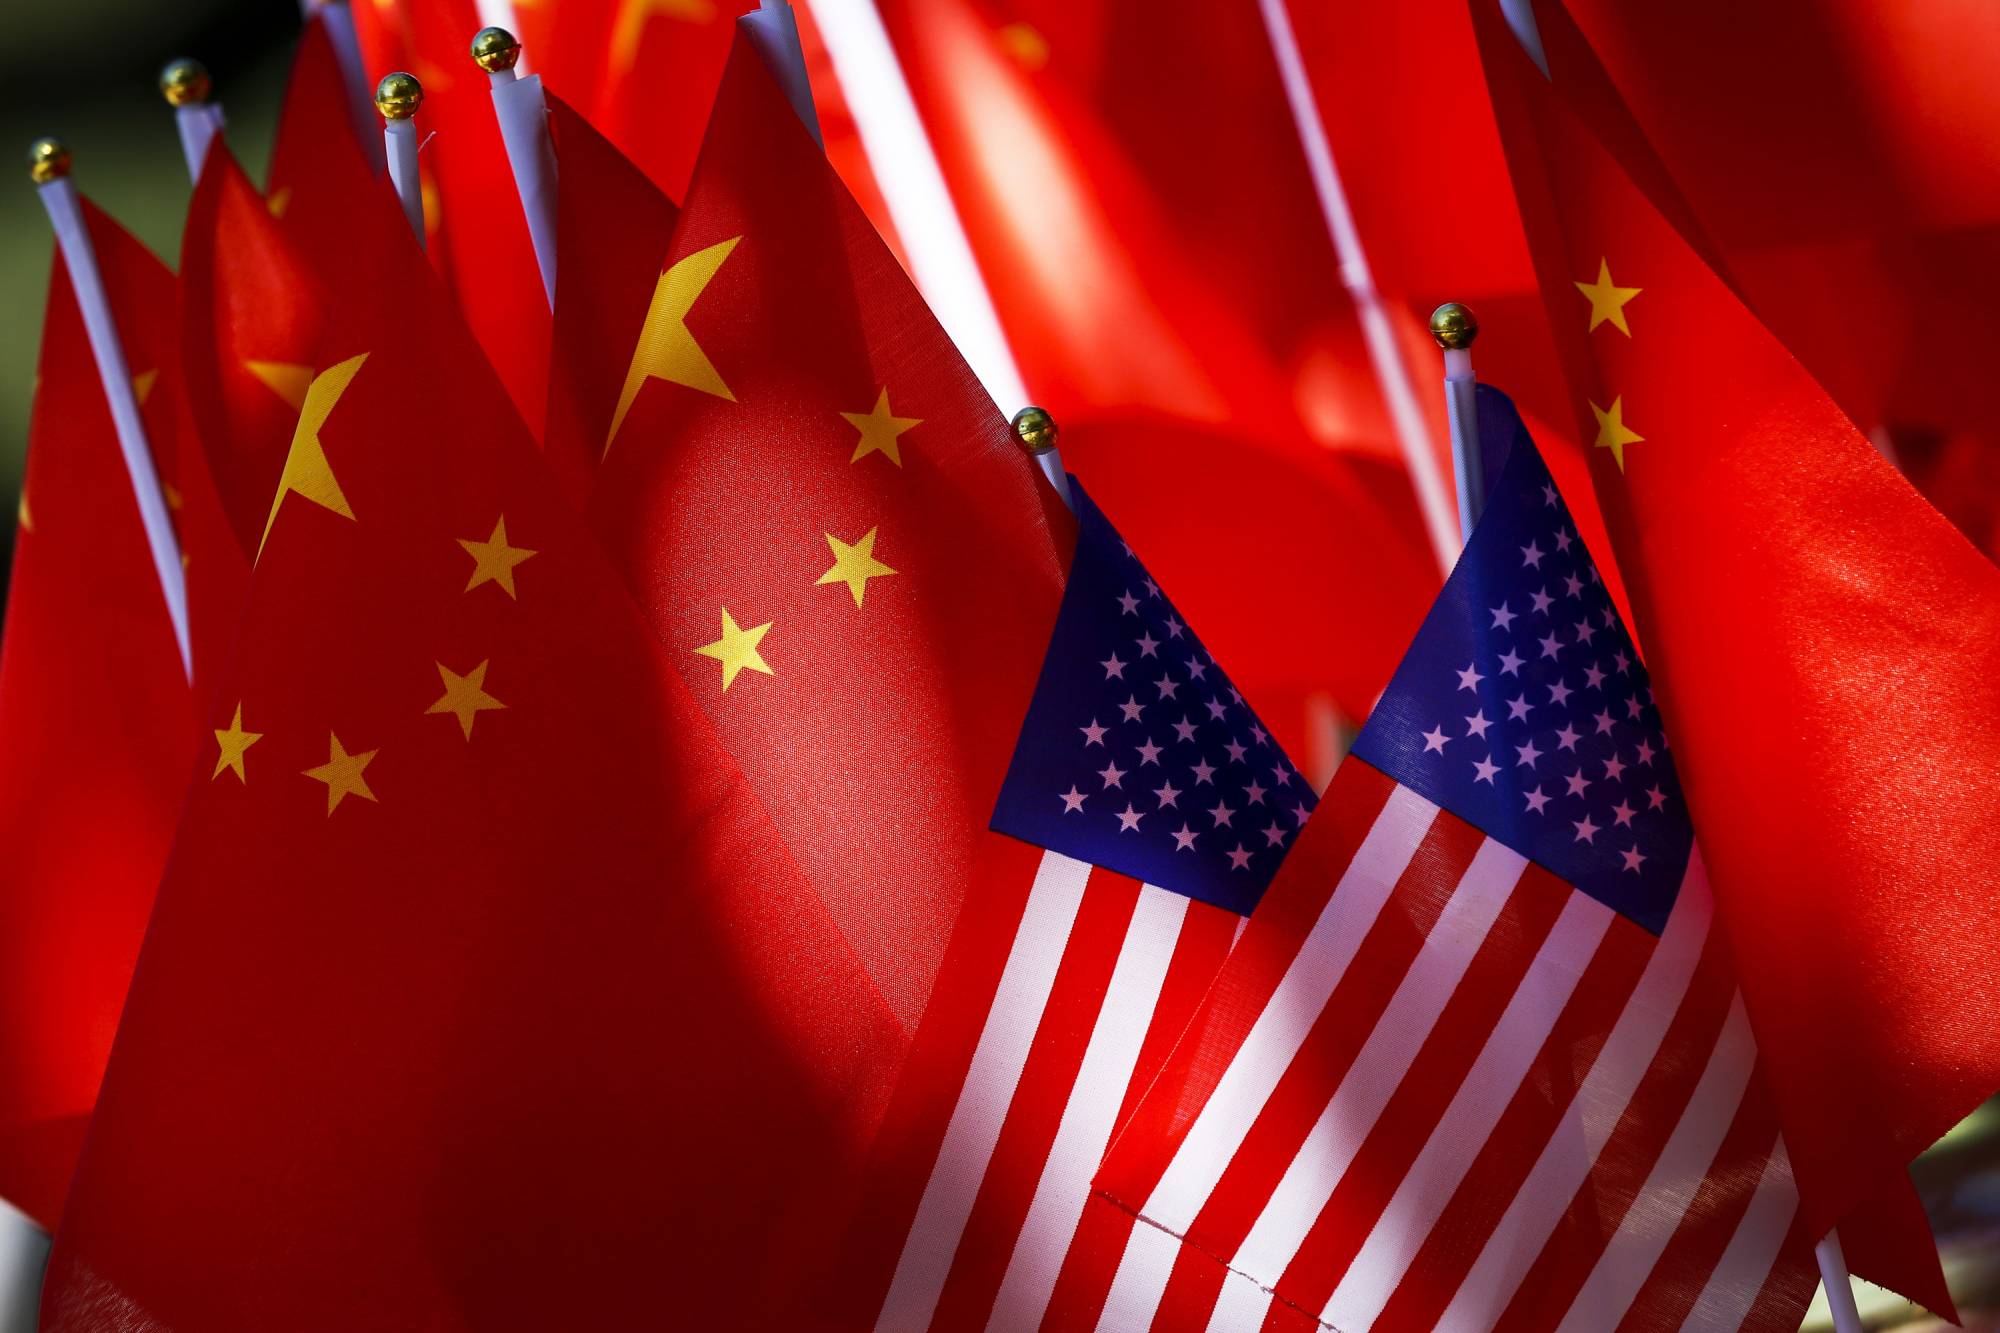 In this Sept. 16, 2018, photo, American flags are displayed together with Chinese flags on top of a trishaw in Beijing.  A congressional advisory panel says the purchase of internet-linked devices manufactured in China leaves the United States vulnerable to security breaches that could put critical U.S. infrastructure at risk. The U.S.-China Economic and Security Review Commission issued the warning Wednesday in a report focused on the increasing use of the internet in household appliances. (AP Photo/Andy Wong)